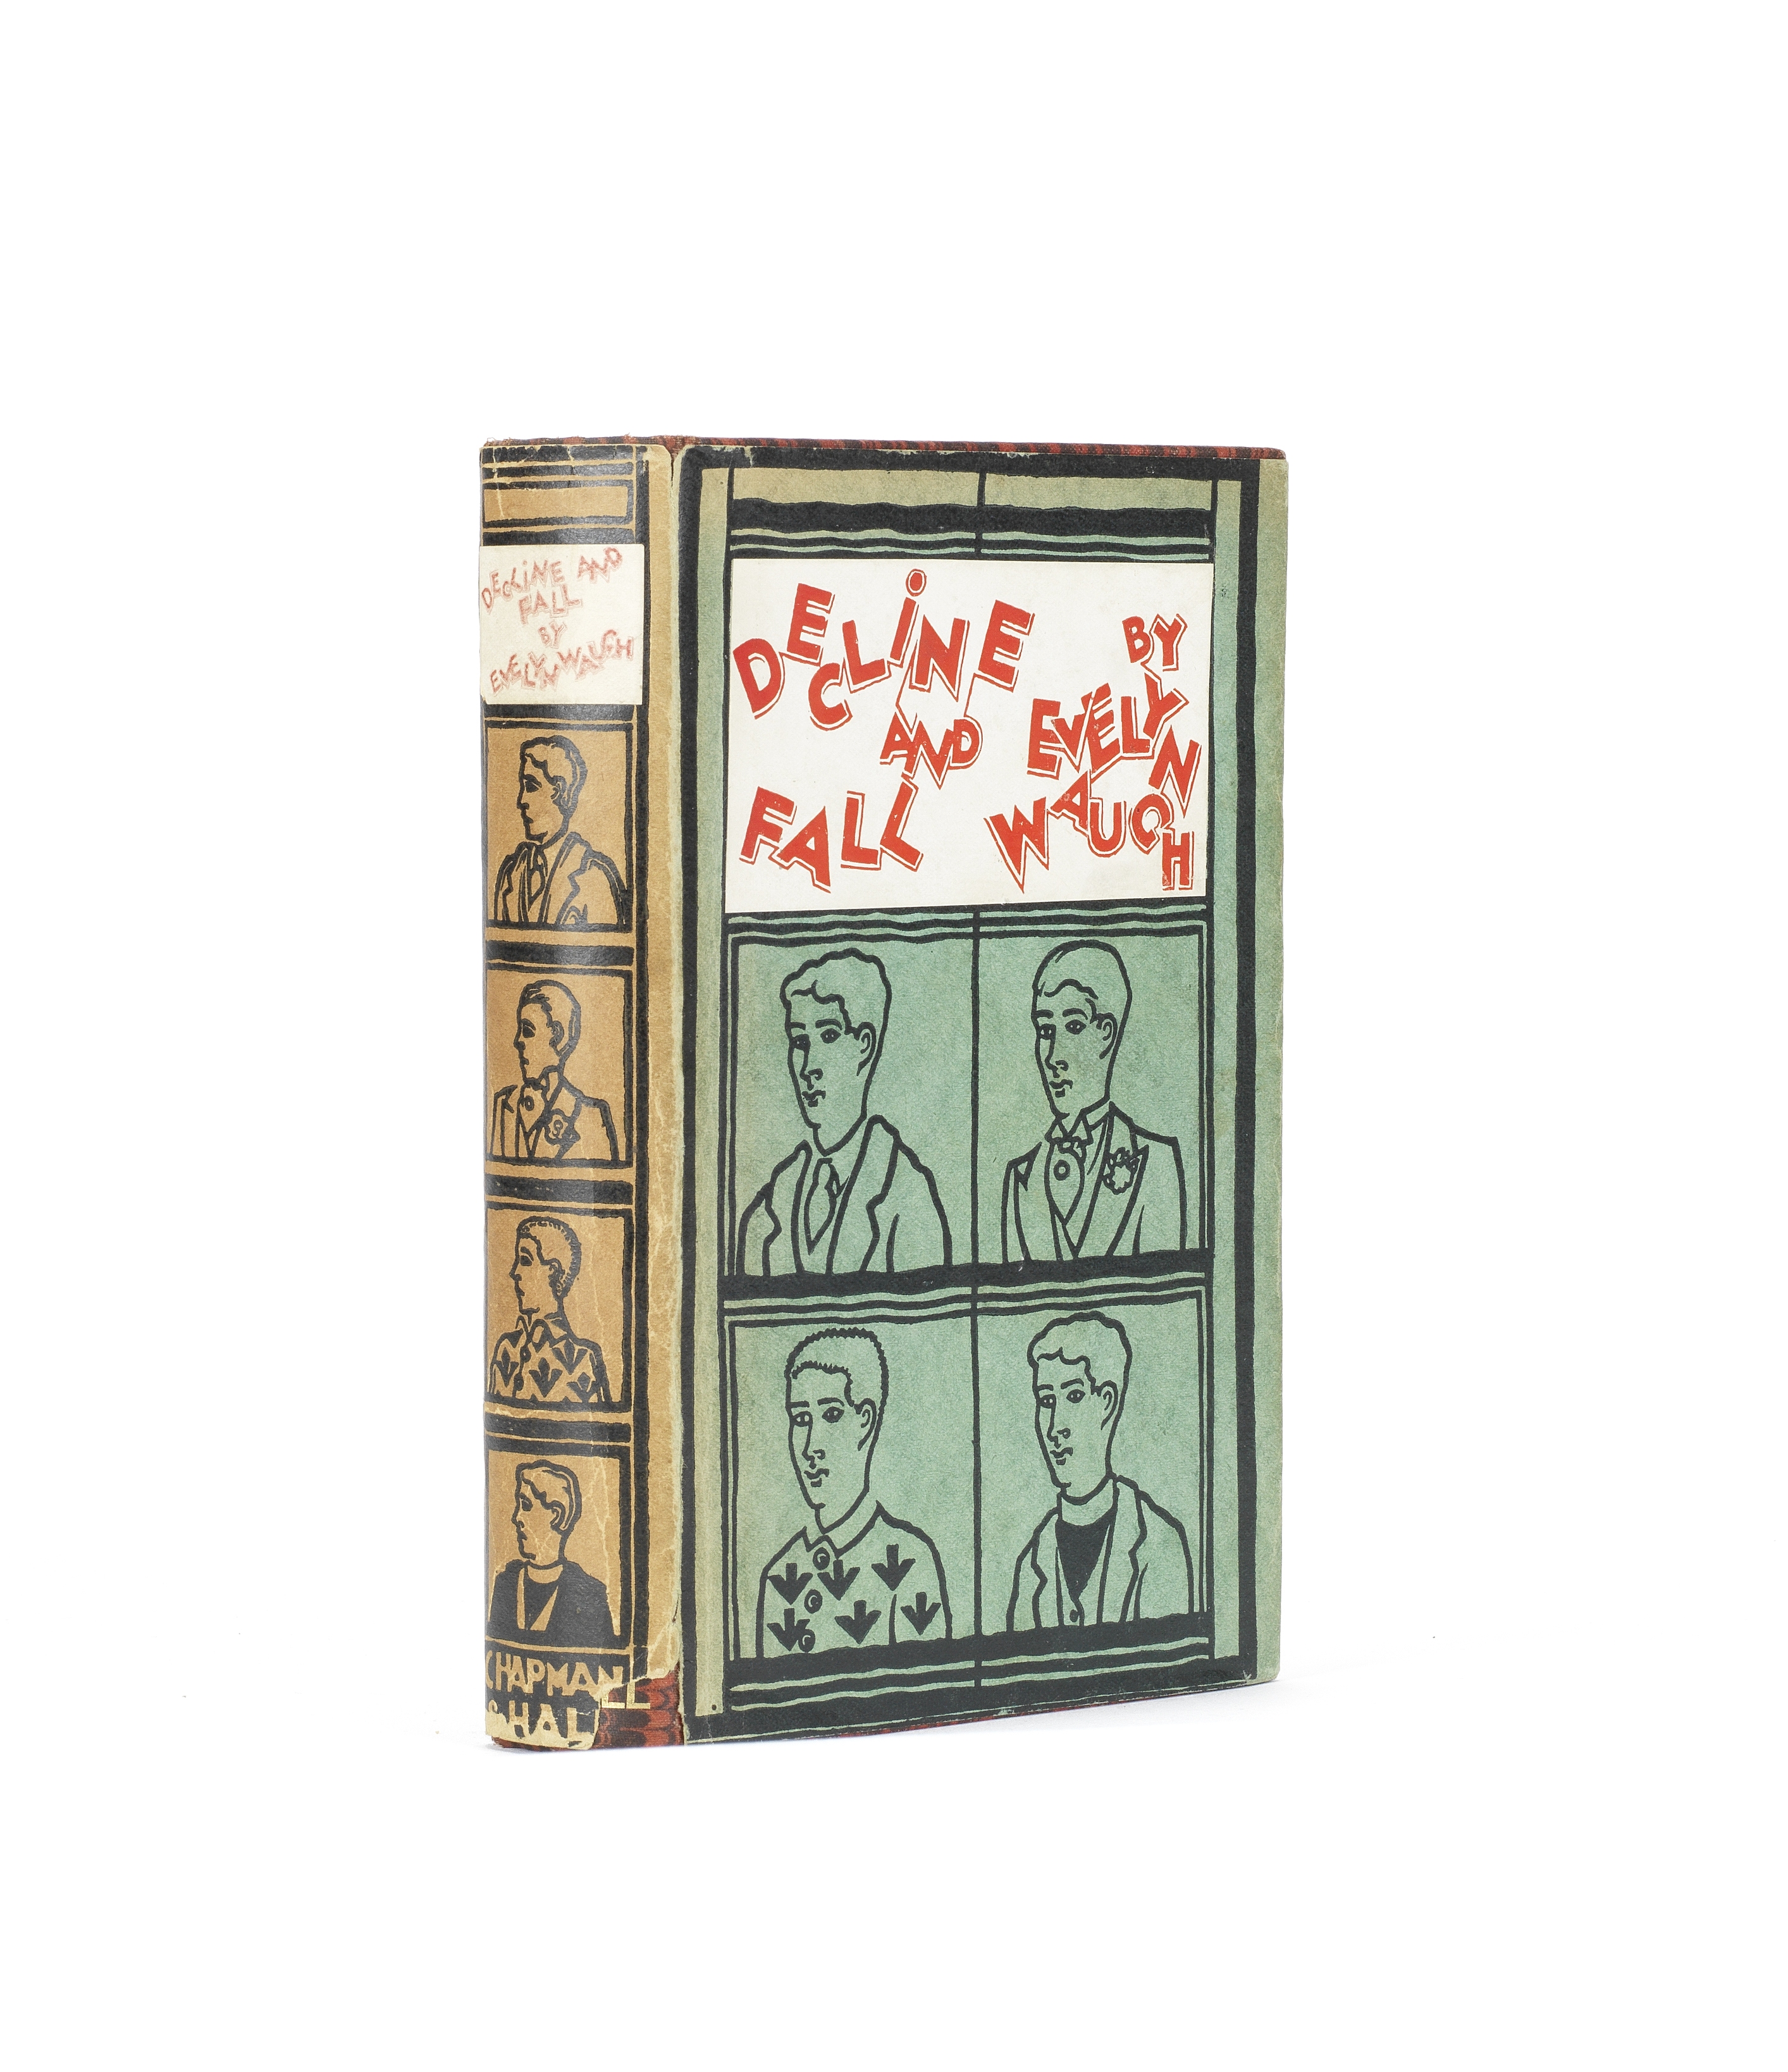 WAUGH (EVELYN) Decline and Fall. An Illustrated Novelette, FIRST EDITION, Chapman & Hall, 1928